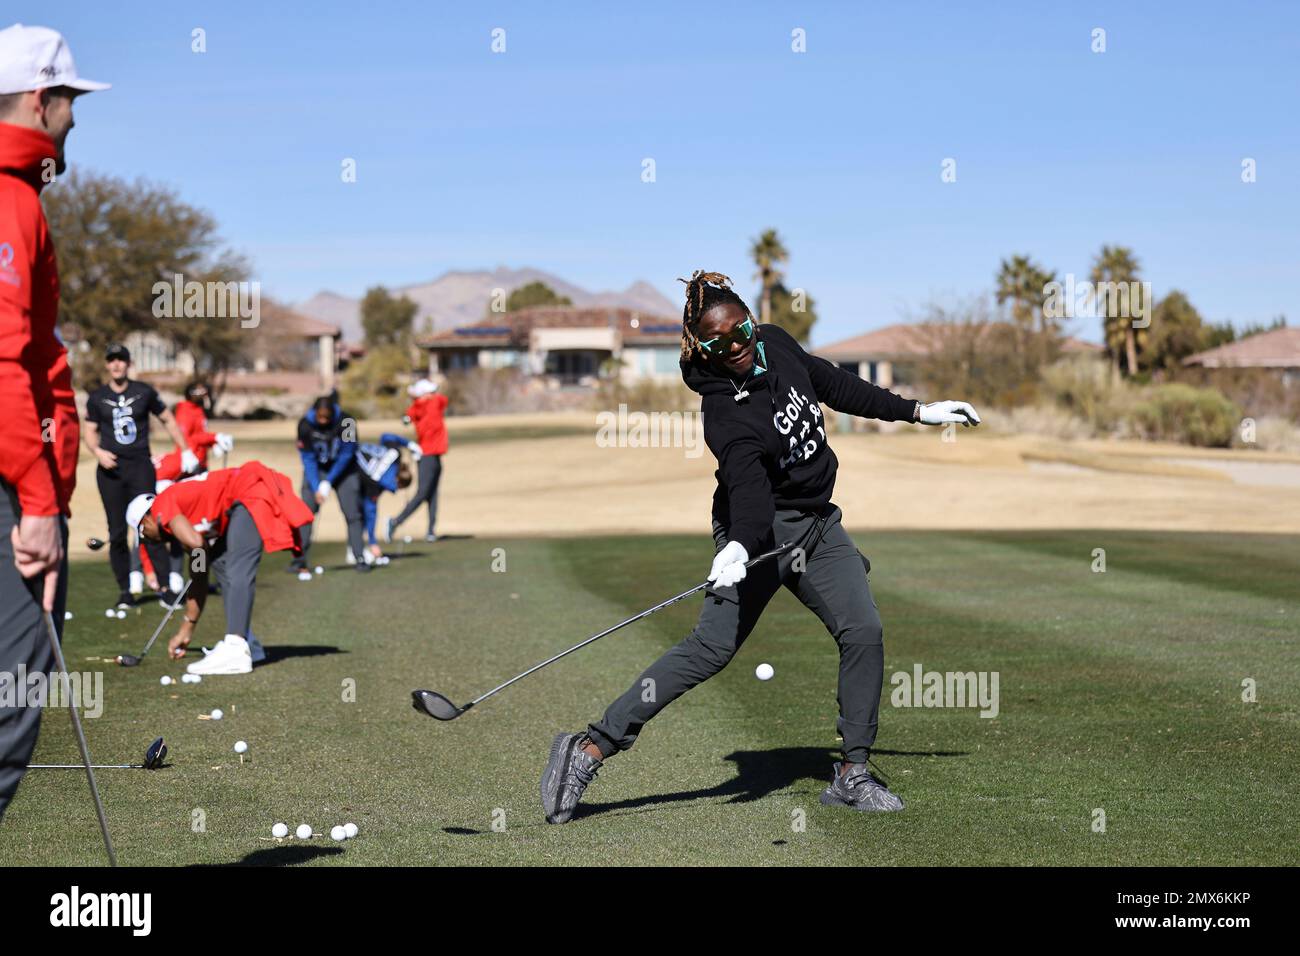 https://c8.alamy.com/comp/2MX6KKP/tiktok-star-snappy-gilmore-demonstrates-his-technique-to-afc-kicker-justin-tucker-before-the-long-drive-event-at-the-nfl-pro-bowl-games-on-wednesday-february-1-2023-at-bears-best-golf-course-in-las-vegas-the-event-is-part-of-the-2023-pro-bowl-games-skills-showdown-airing-on-thursday-february-2-on-espn-gregory-payanap-images-for-nfl-2MX6KKP.jpg